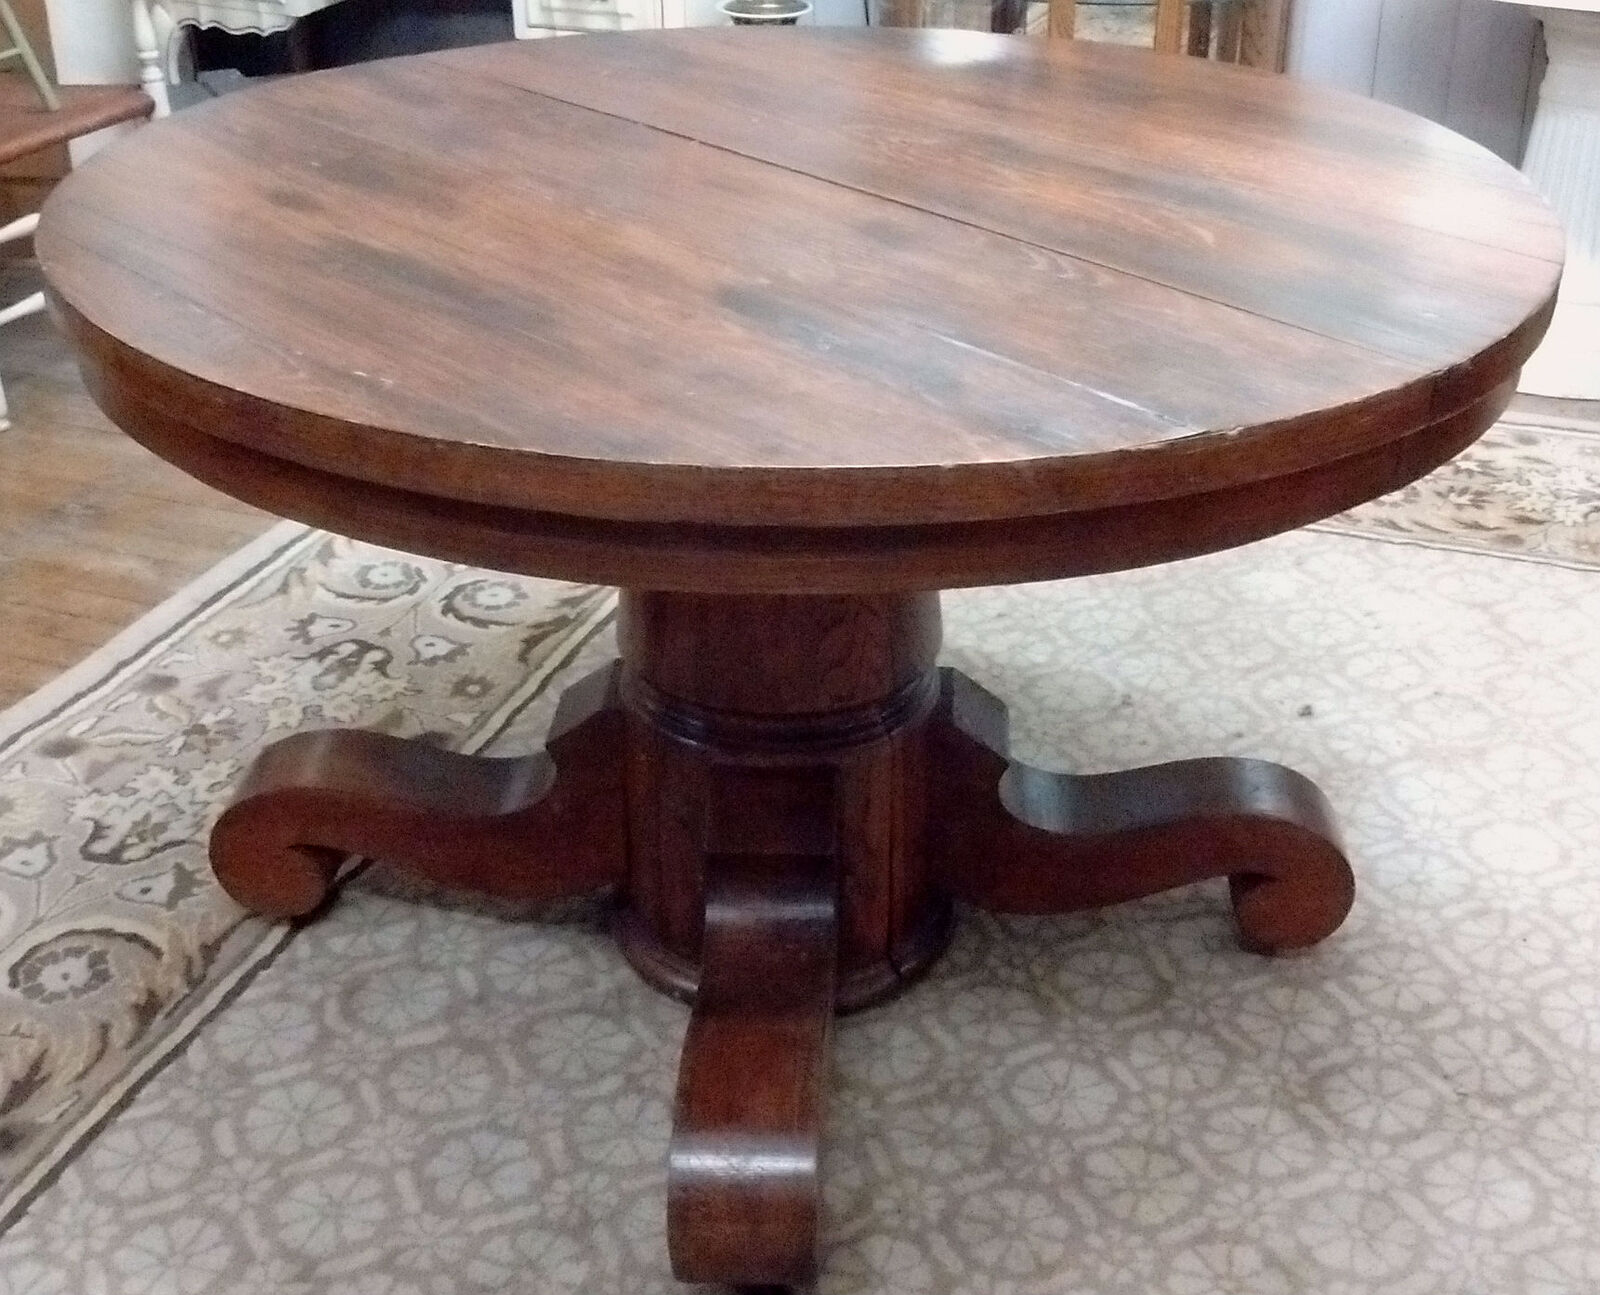 Vintage Round Oak Pedestal Dining Table, Vintage Round Oak Table And Chairs